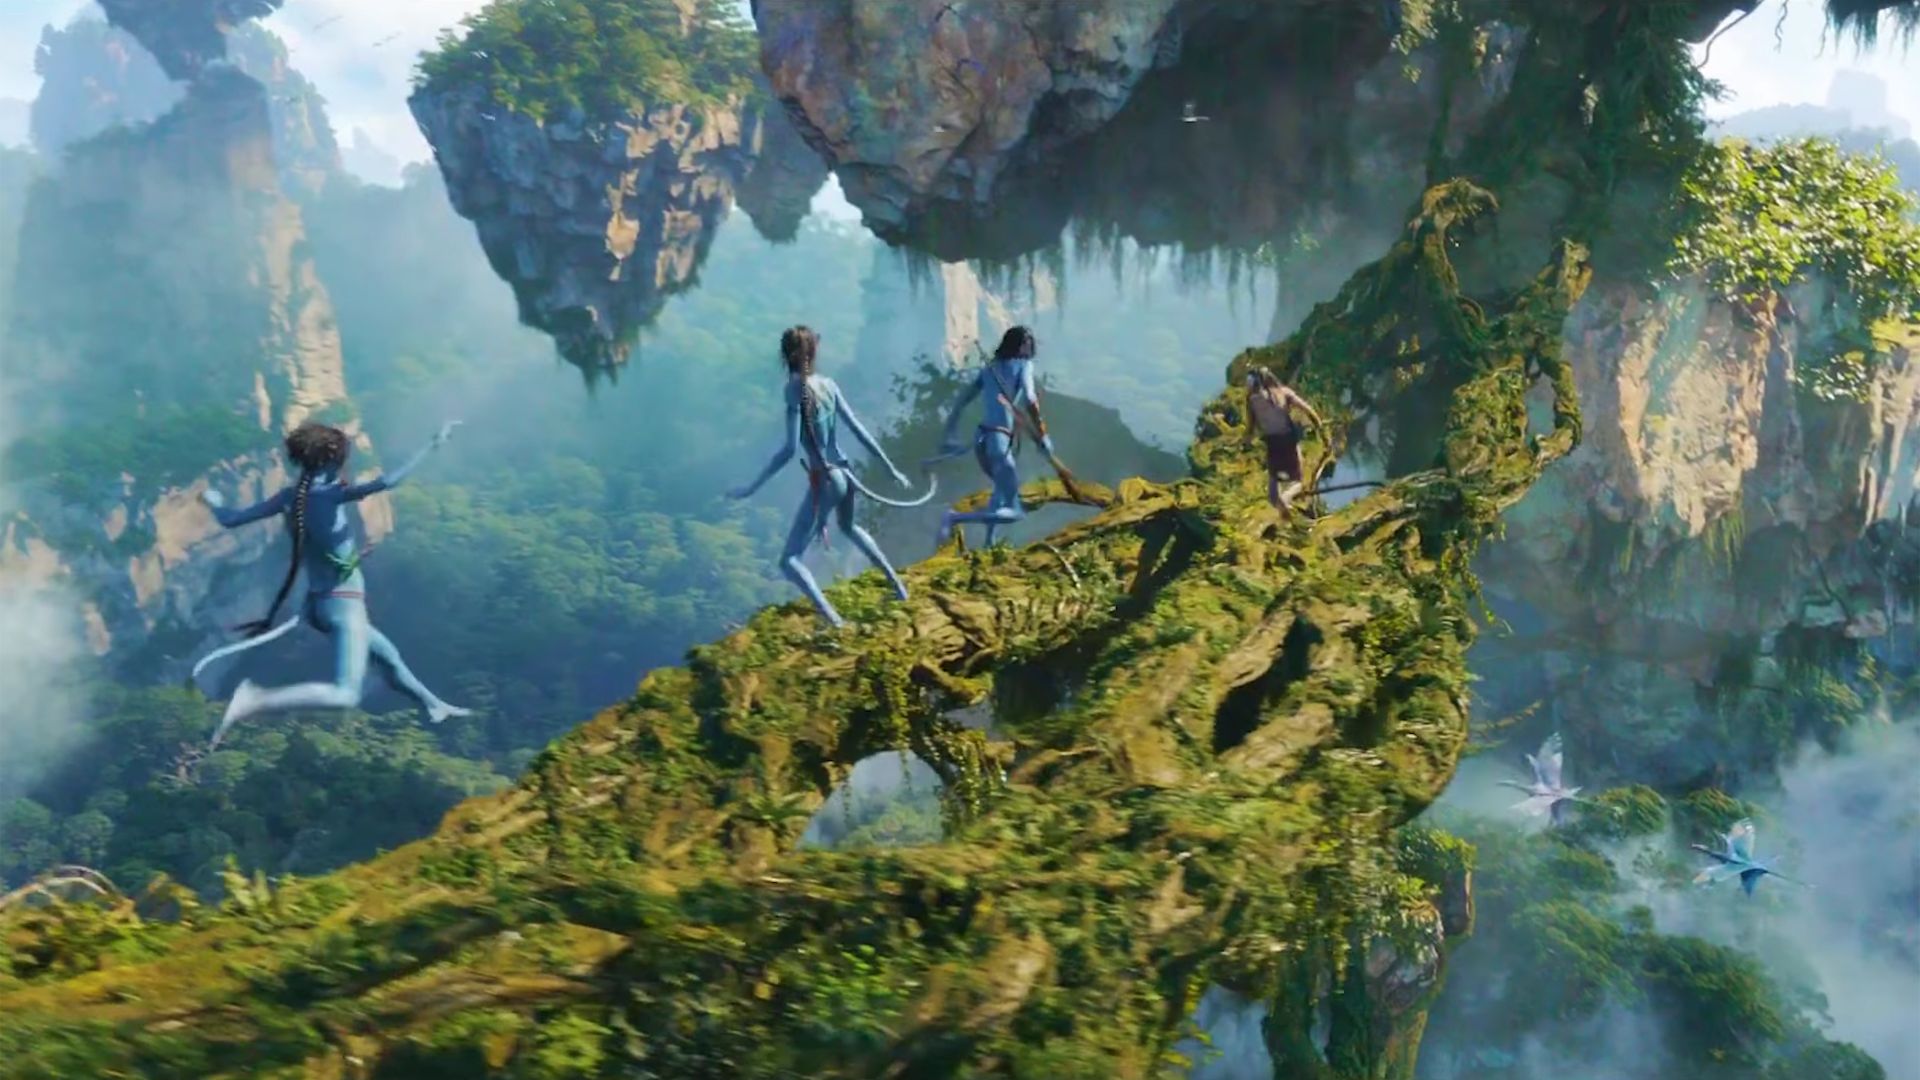 Wallpaper Avatar 2 The Way of Water, 4k, trailer, Movies #23984 - Page 3